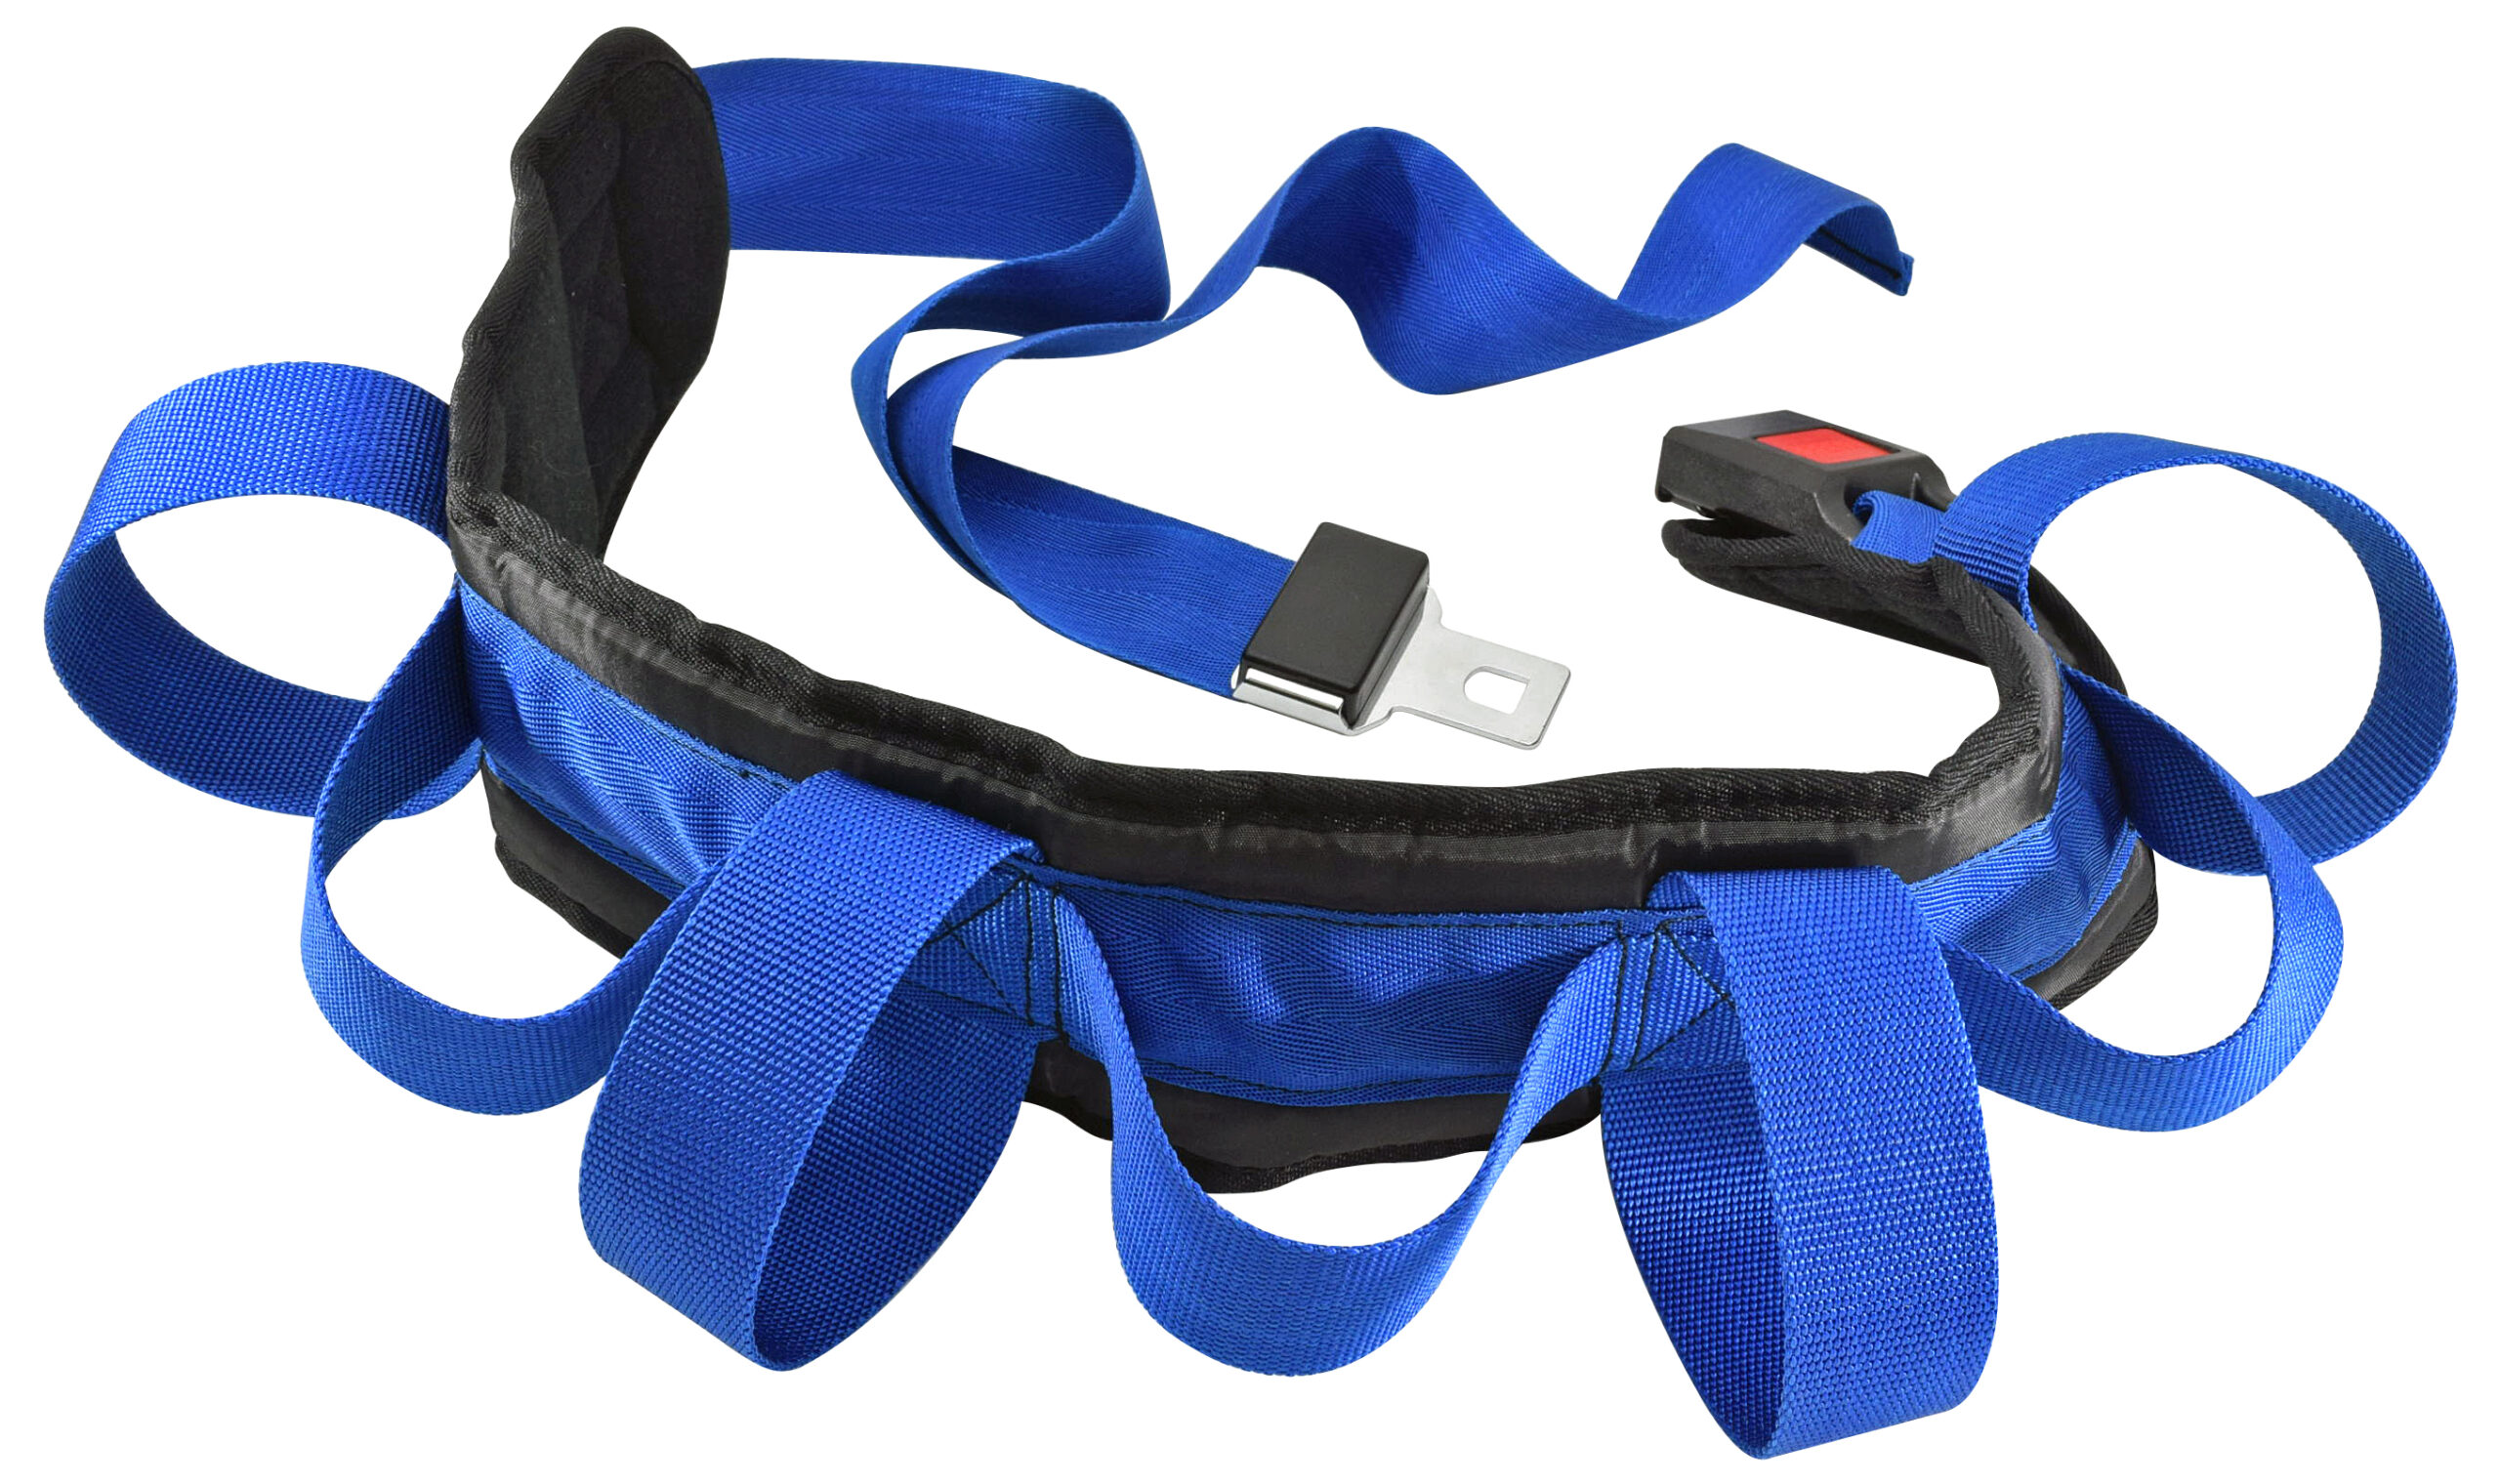 STWB-70A transfer gait belt with handles and auto style buckle